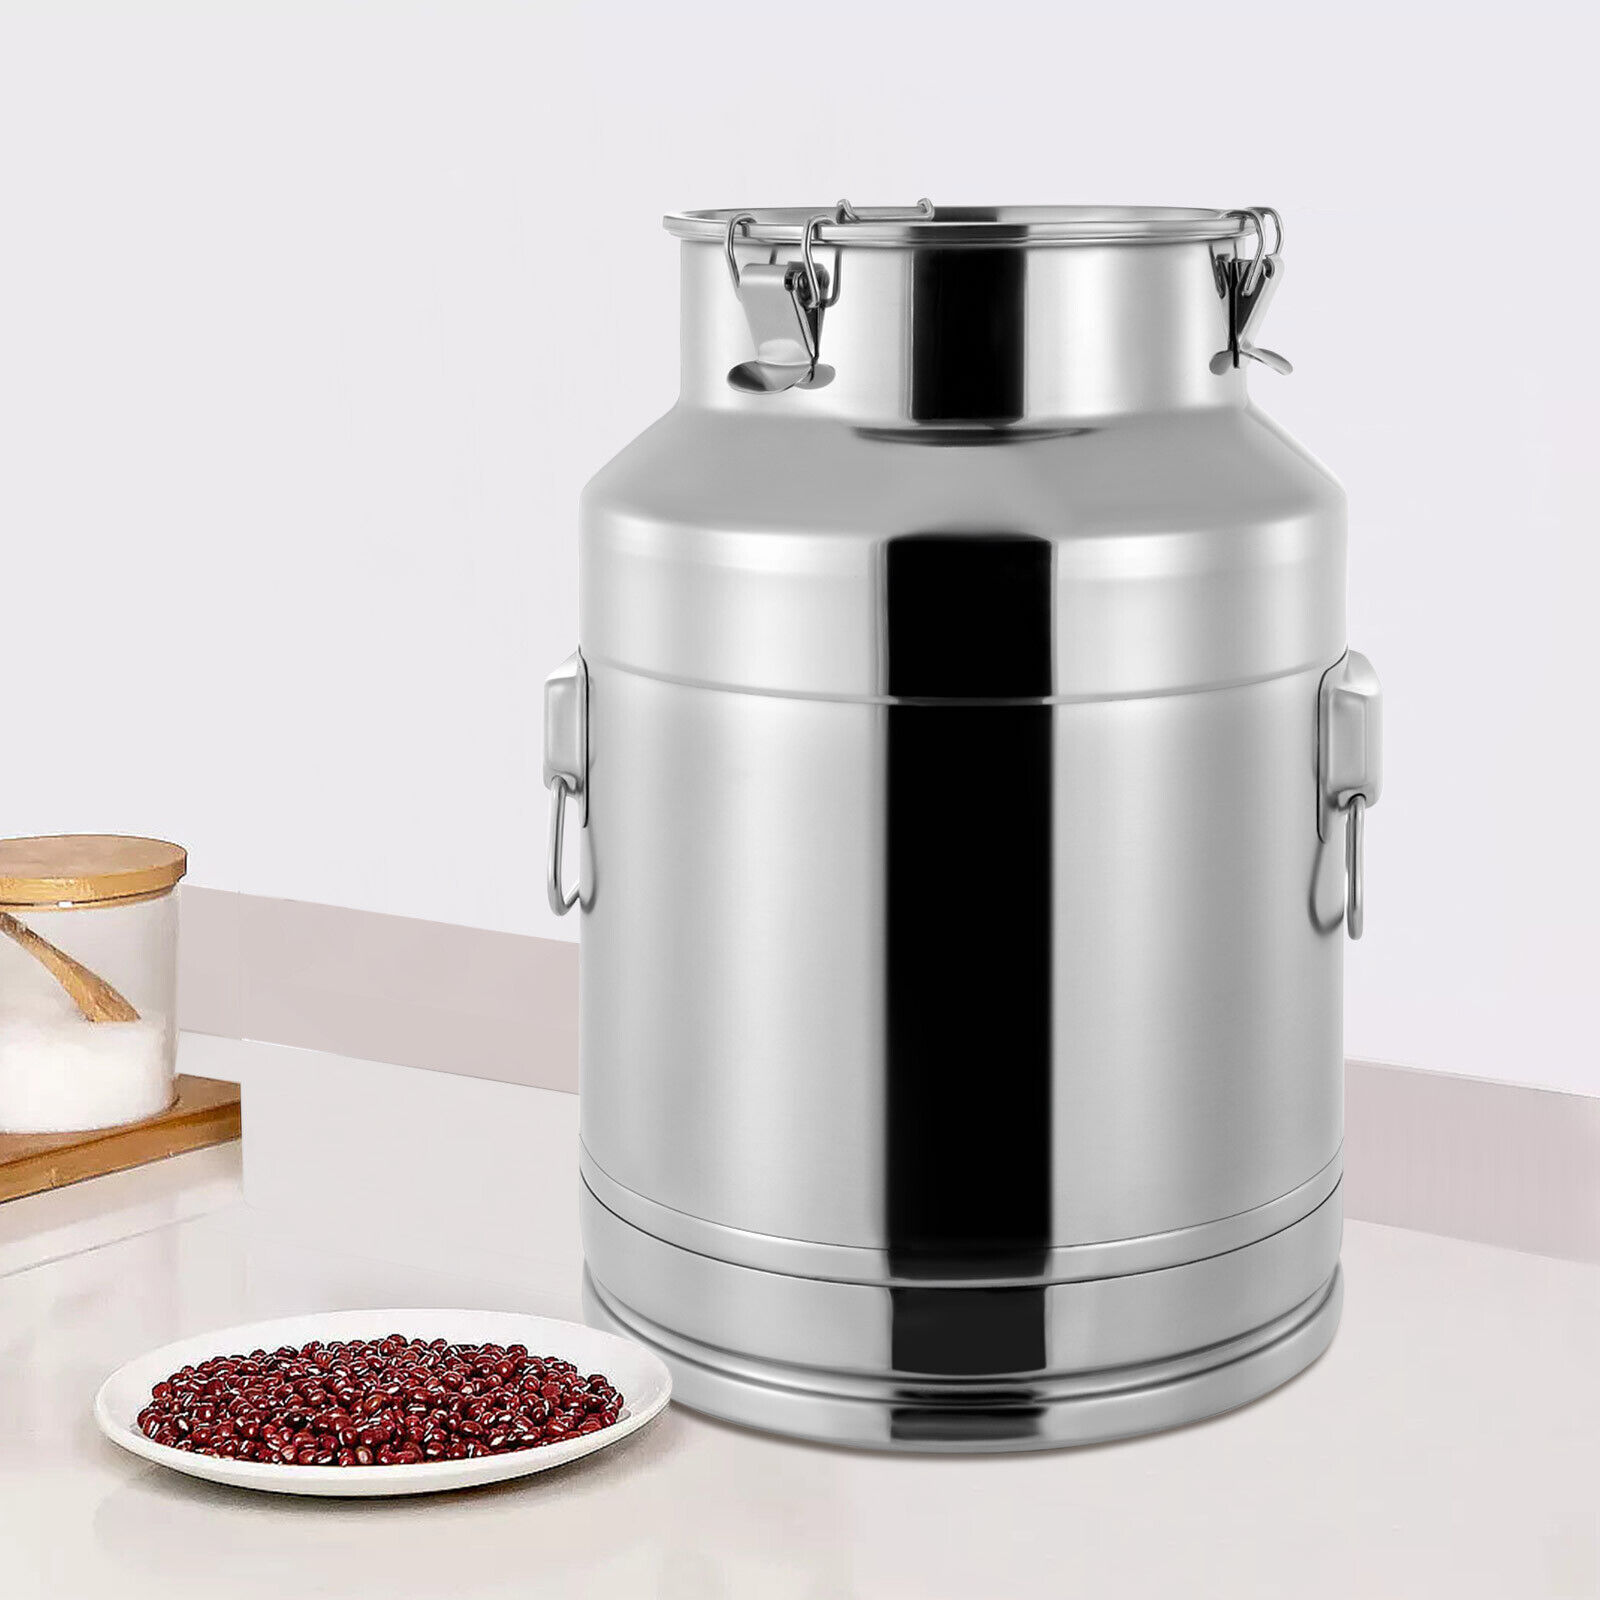 28L/35L Stainless Steel Milk Can Oil Pail Storage Bucket Wine Barrel Canister